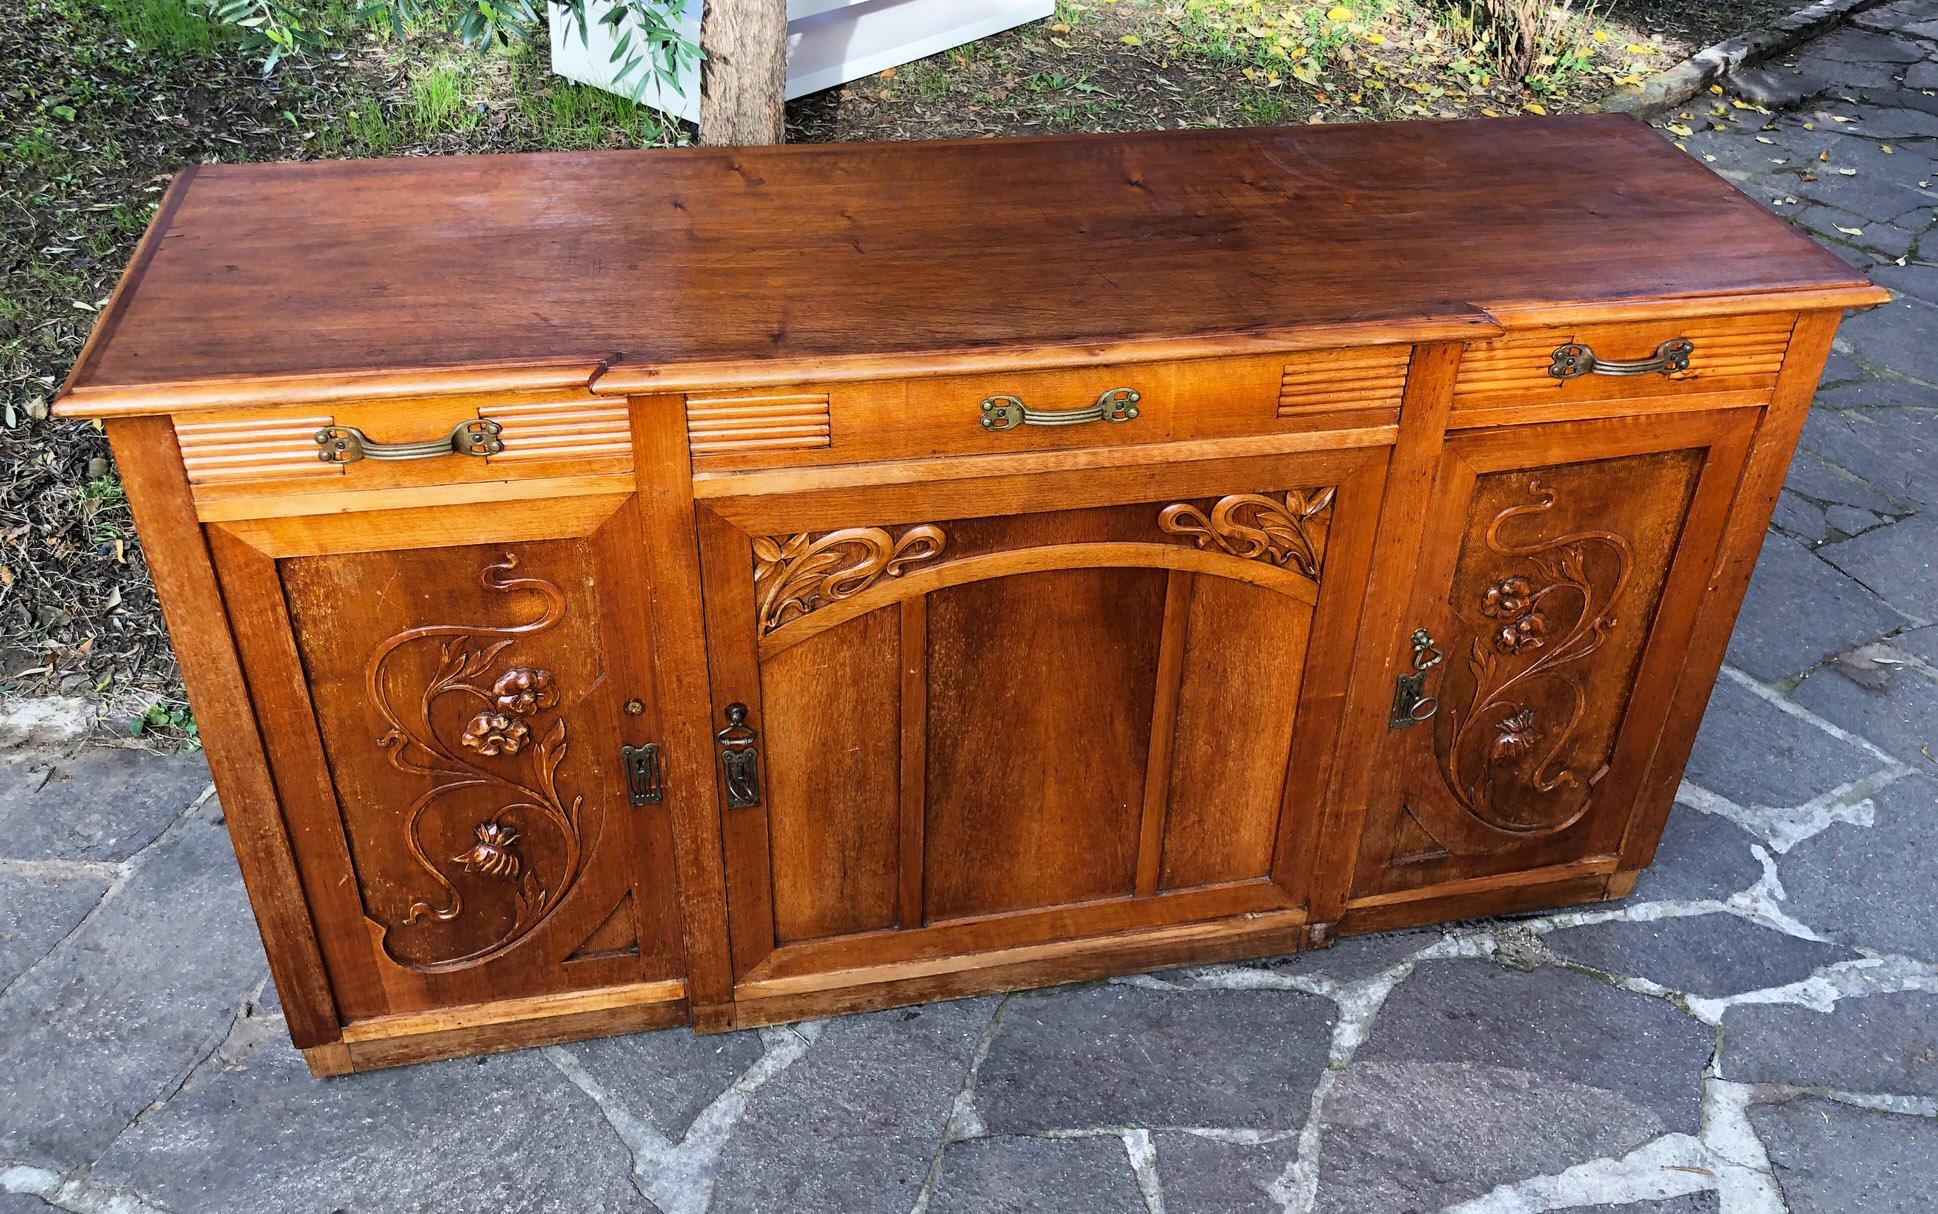 Original Italian Art Noveau Sideboard in Honey-Colored Walnut with Three Drawers For Sale 3